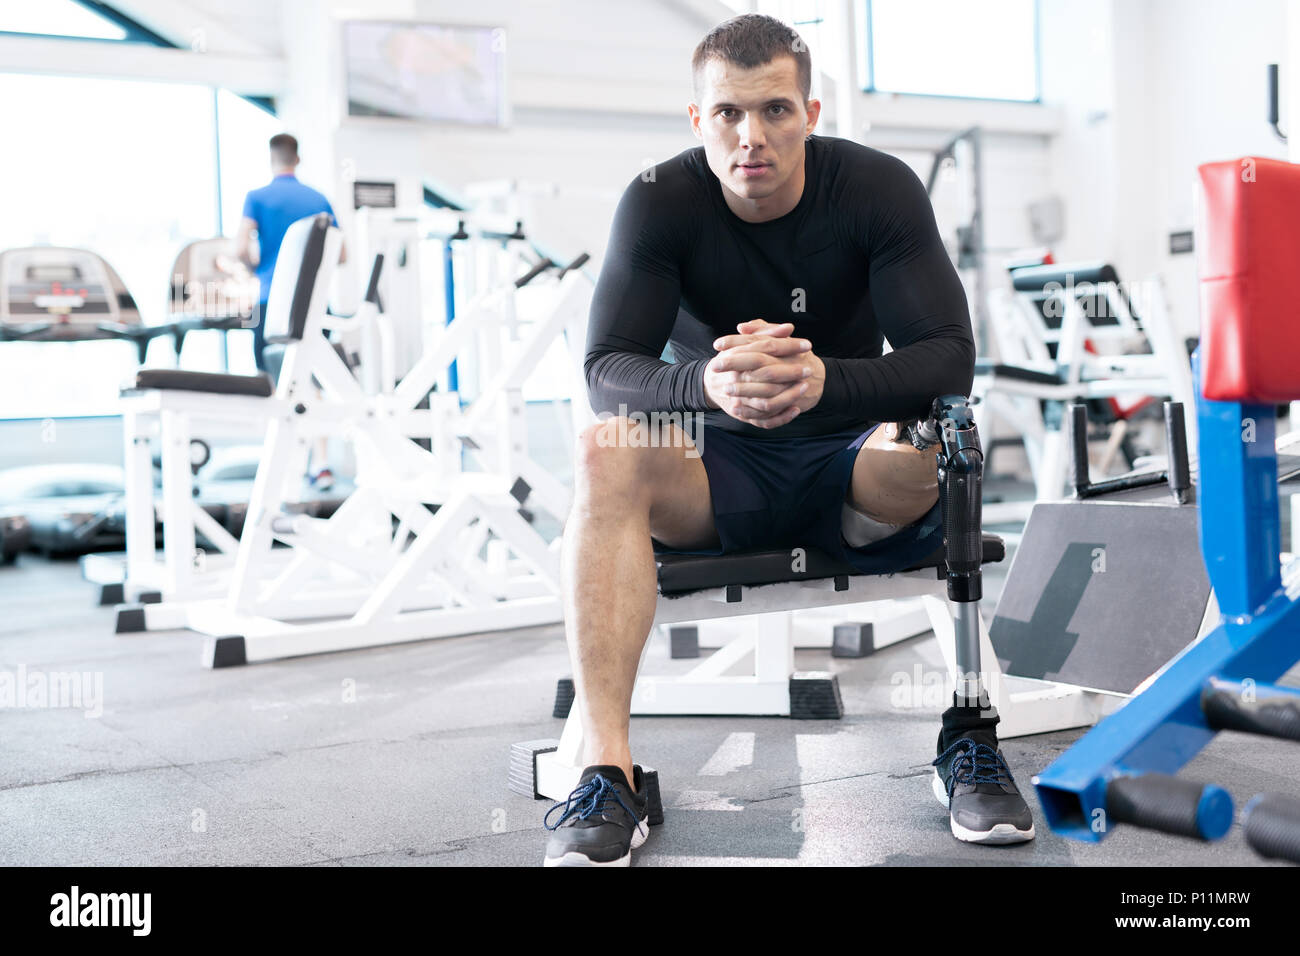 Disabled man in gym Stock Photo